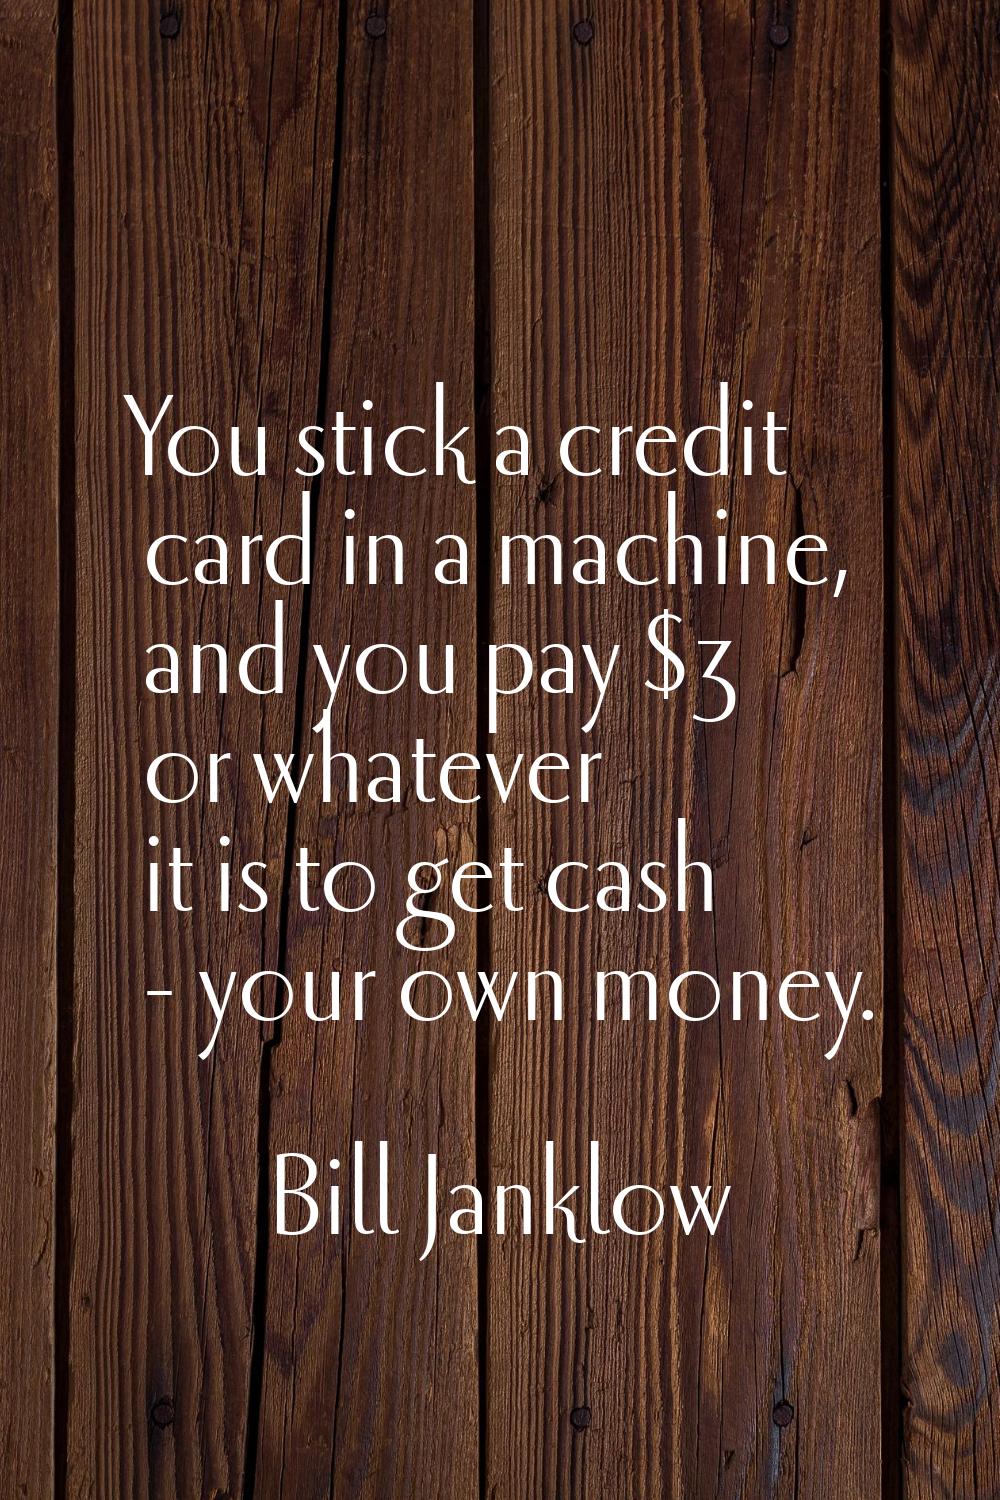 You stick a credit card in a machine, and you pay $3 or whatever it is to get cash - your own money